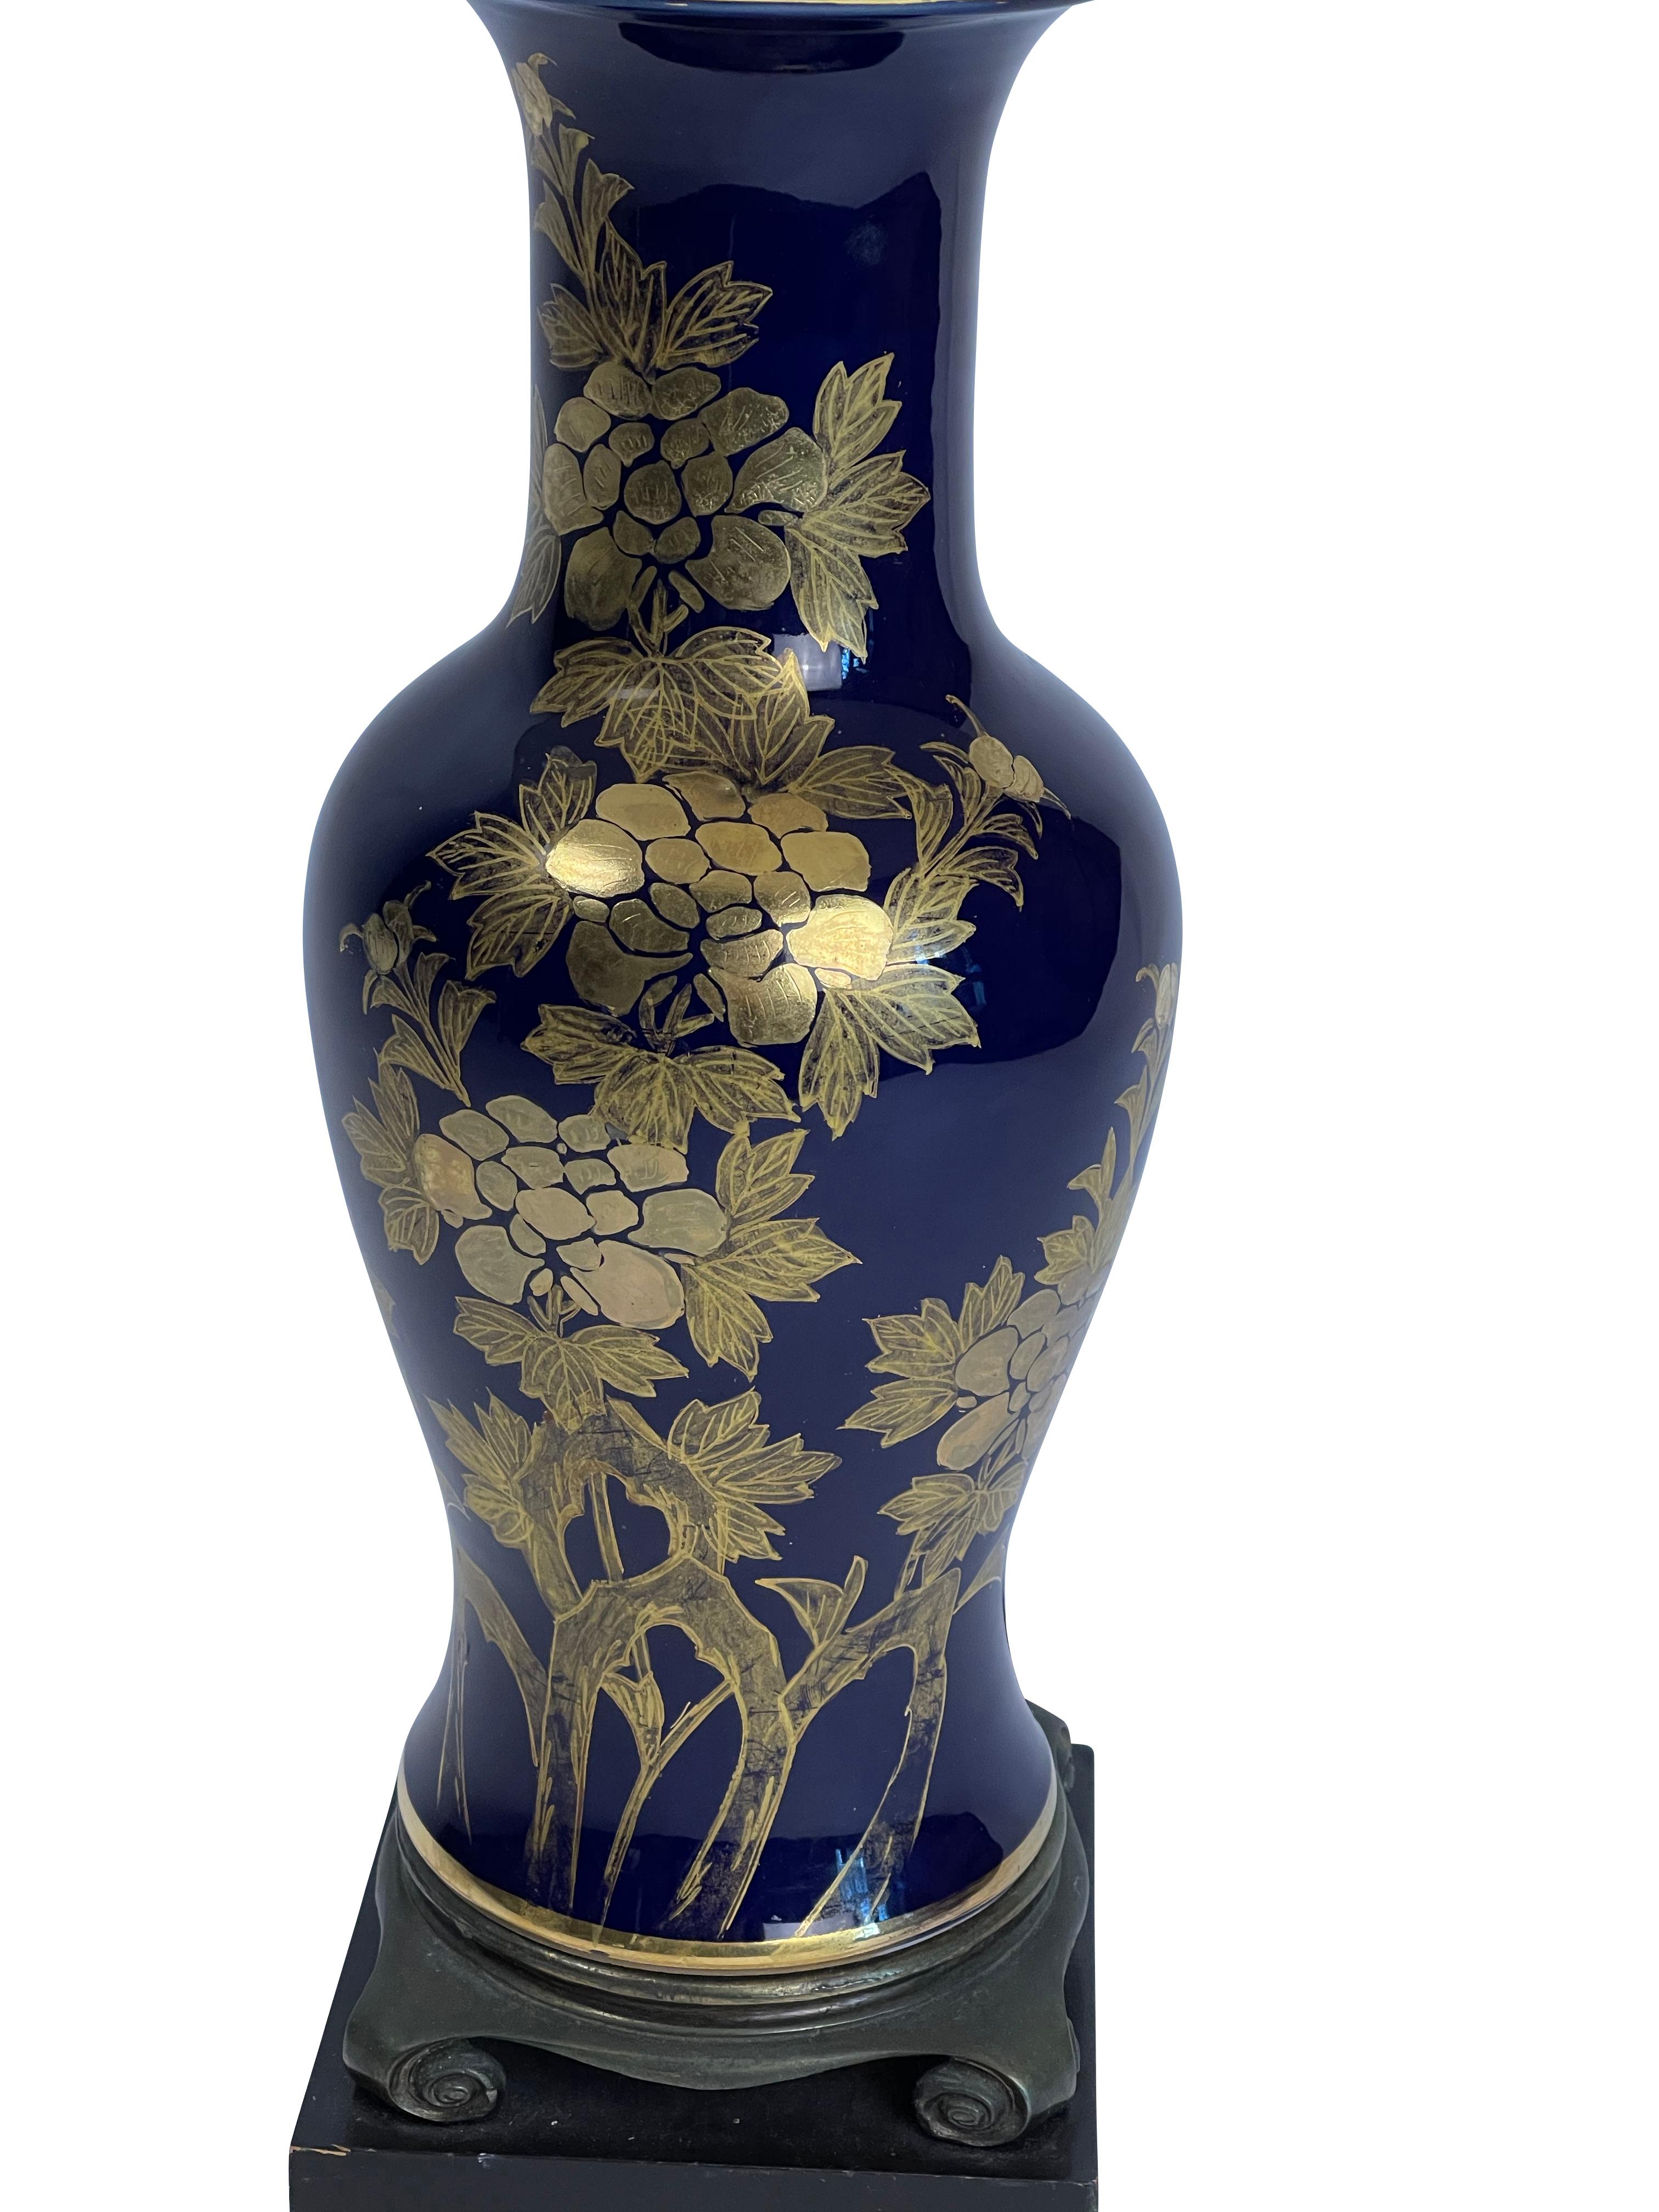 Cobalt blue and gold Japanese design porcelain lamp. New beige curve bell lamp shade.
Measures: 31 inches high by 6.5 inches wide. 

 